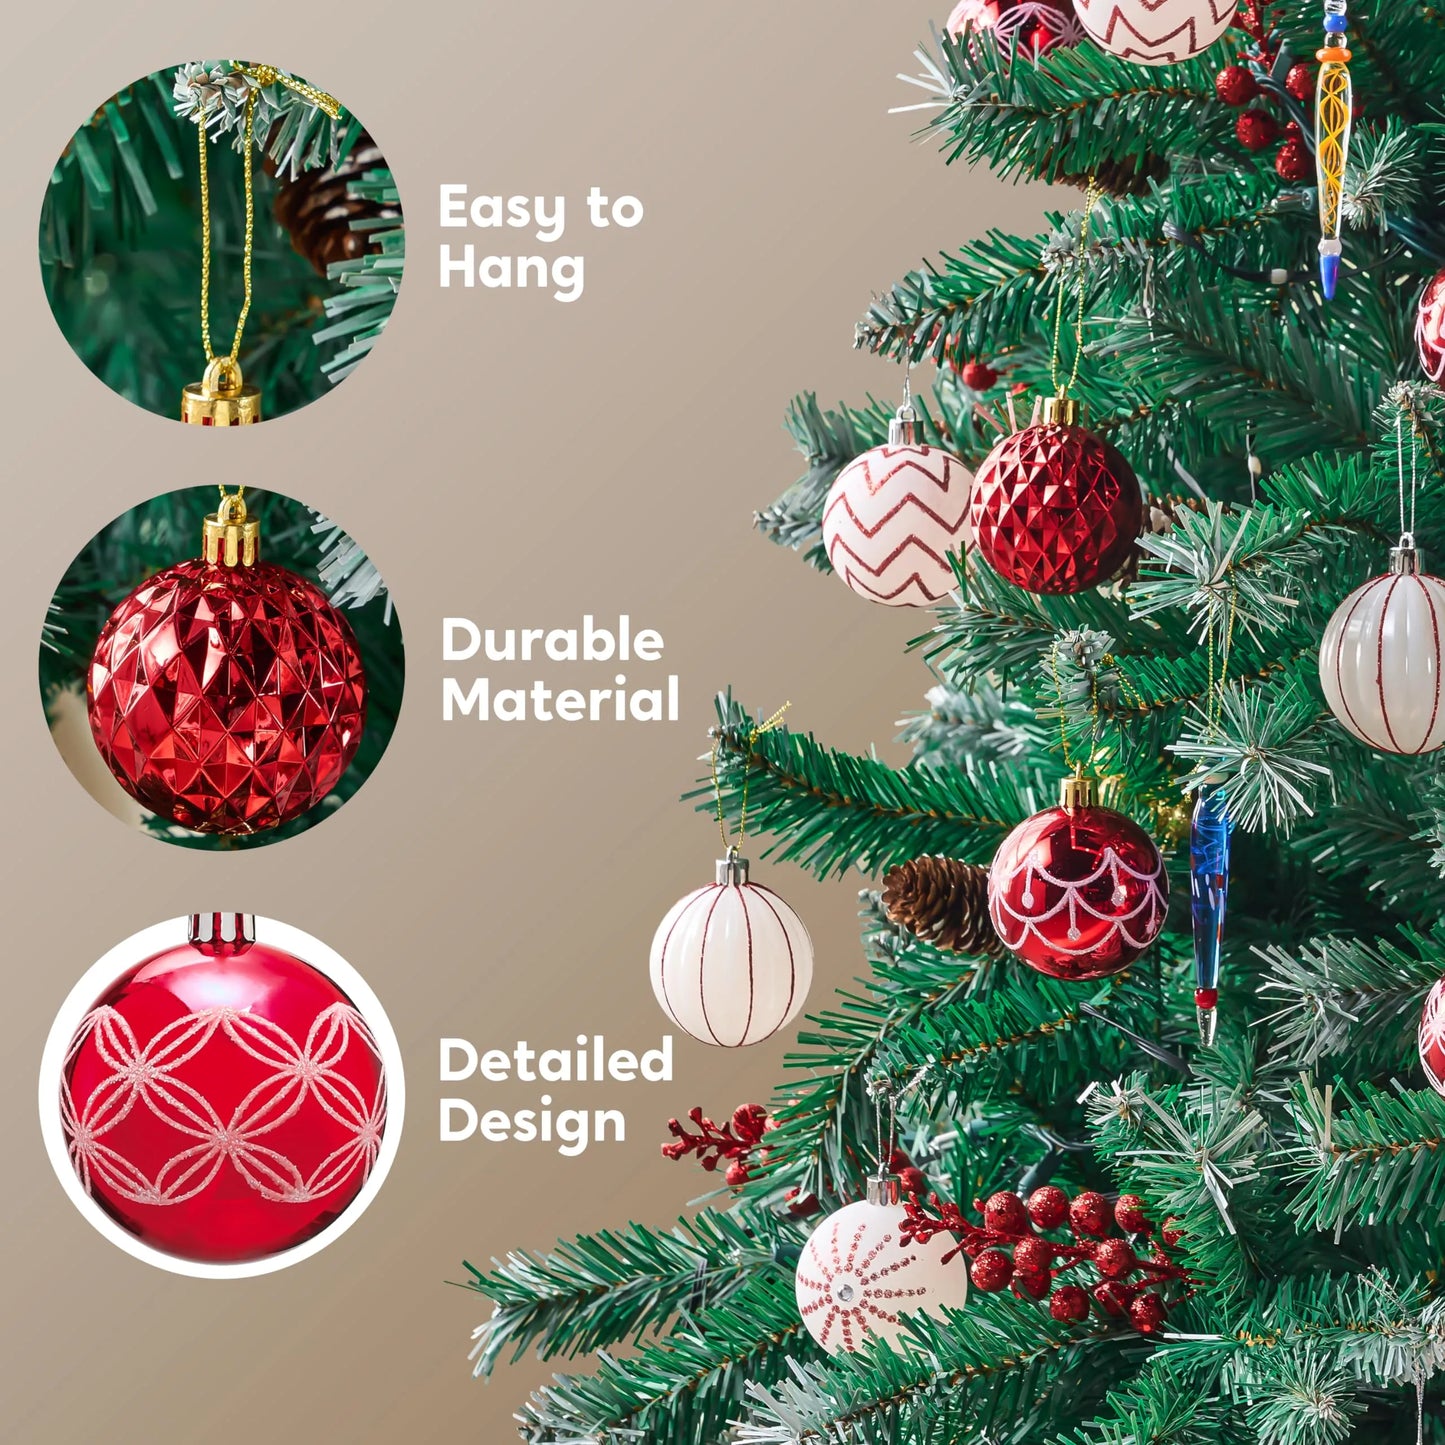 30Pcs 2.3in Designed Christmas Red and White Ball Ornaments